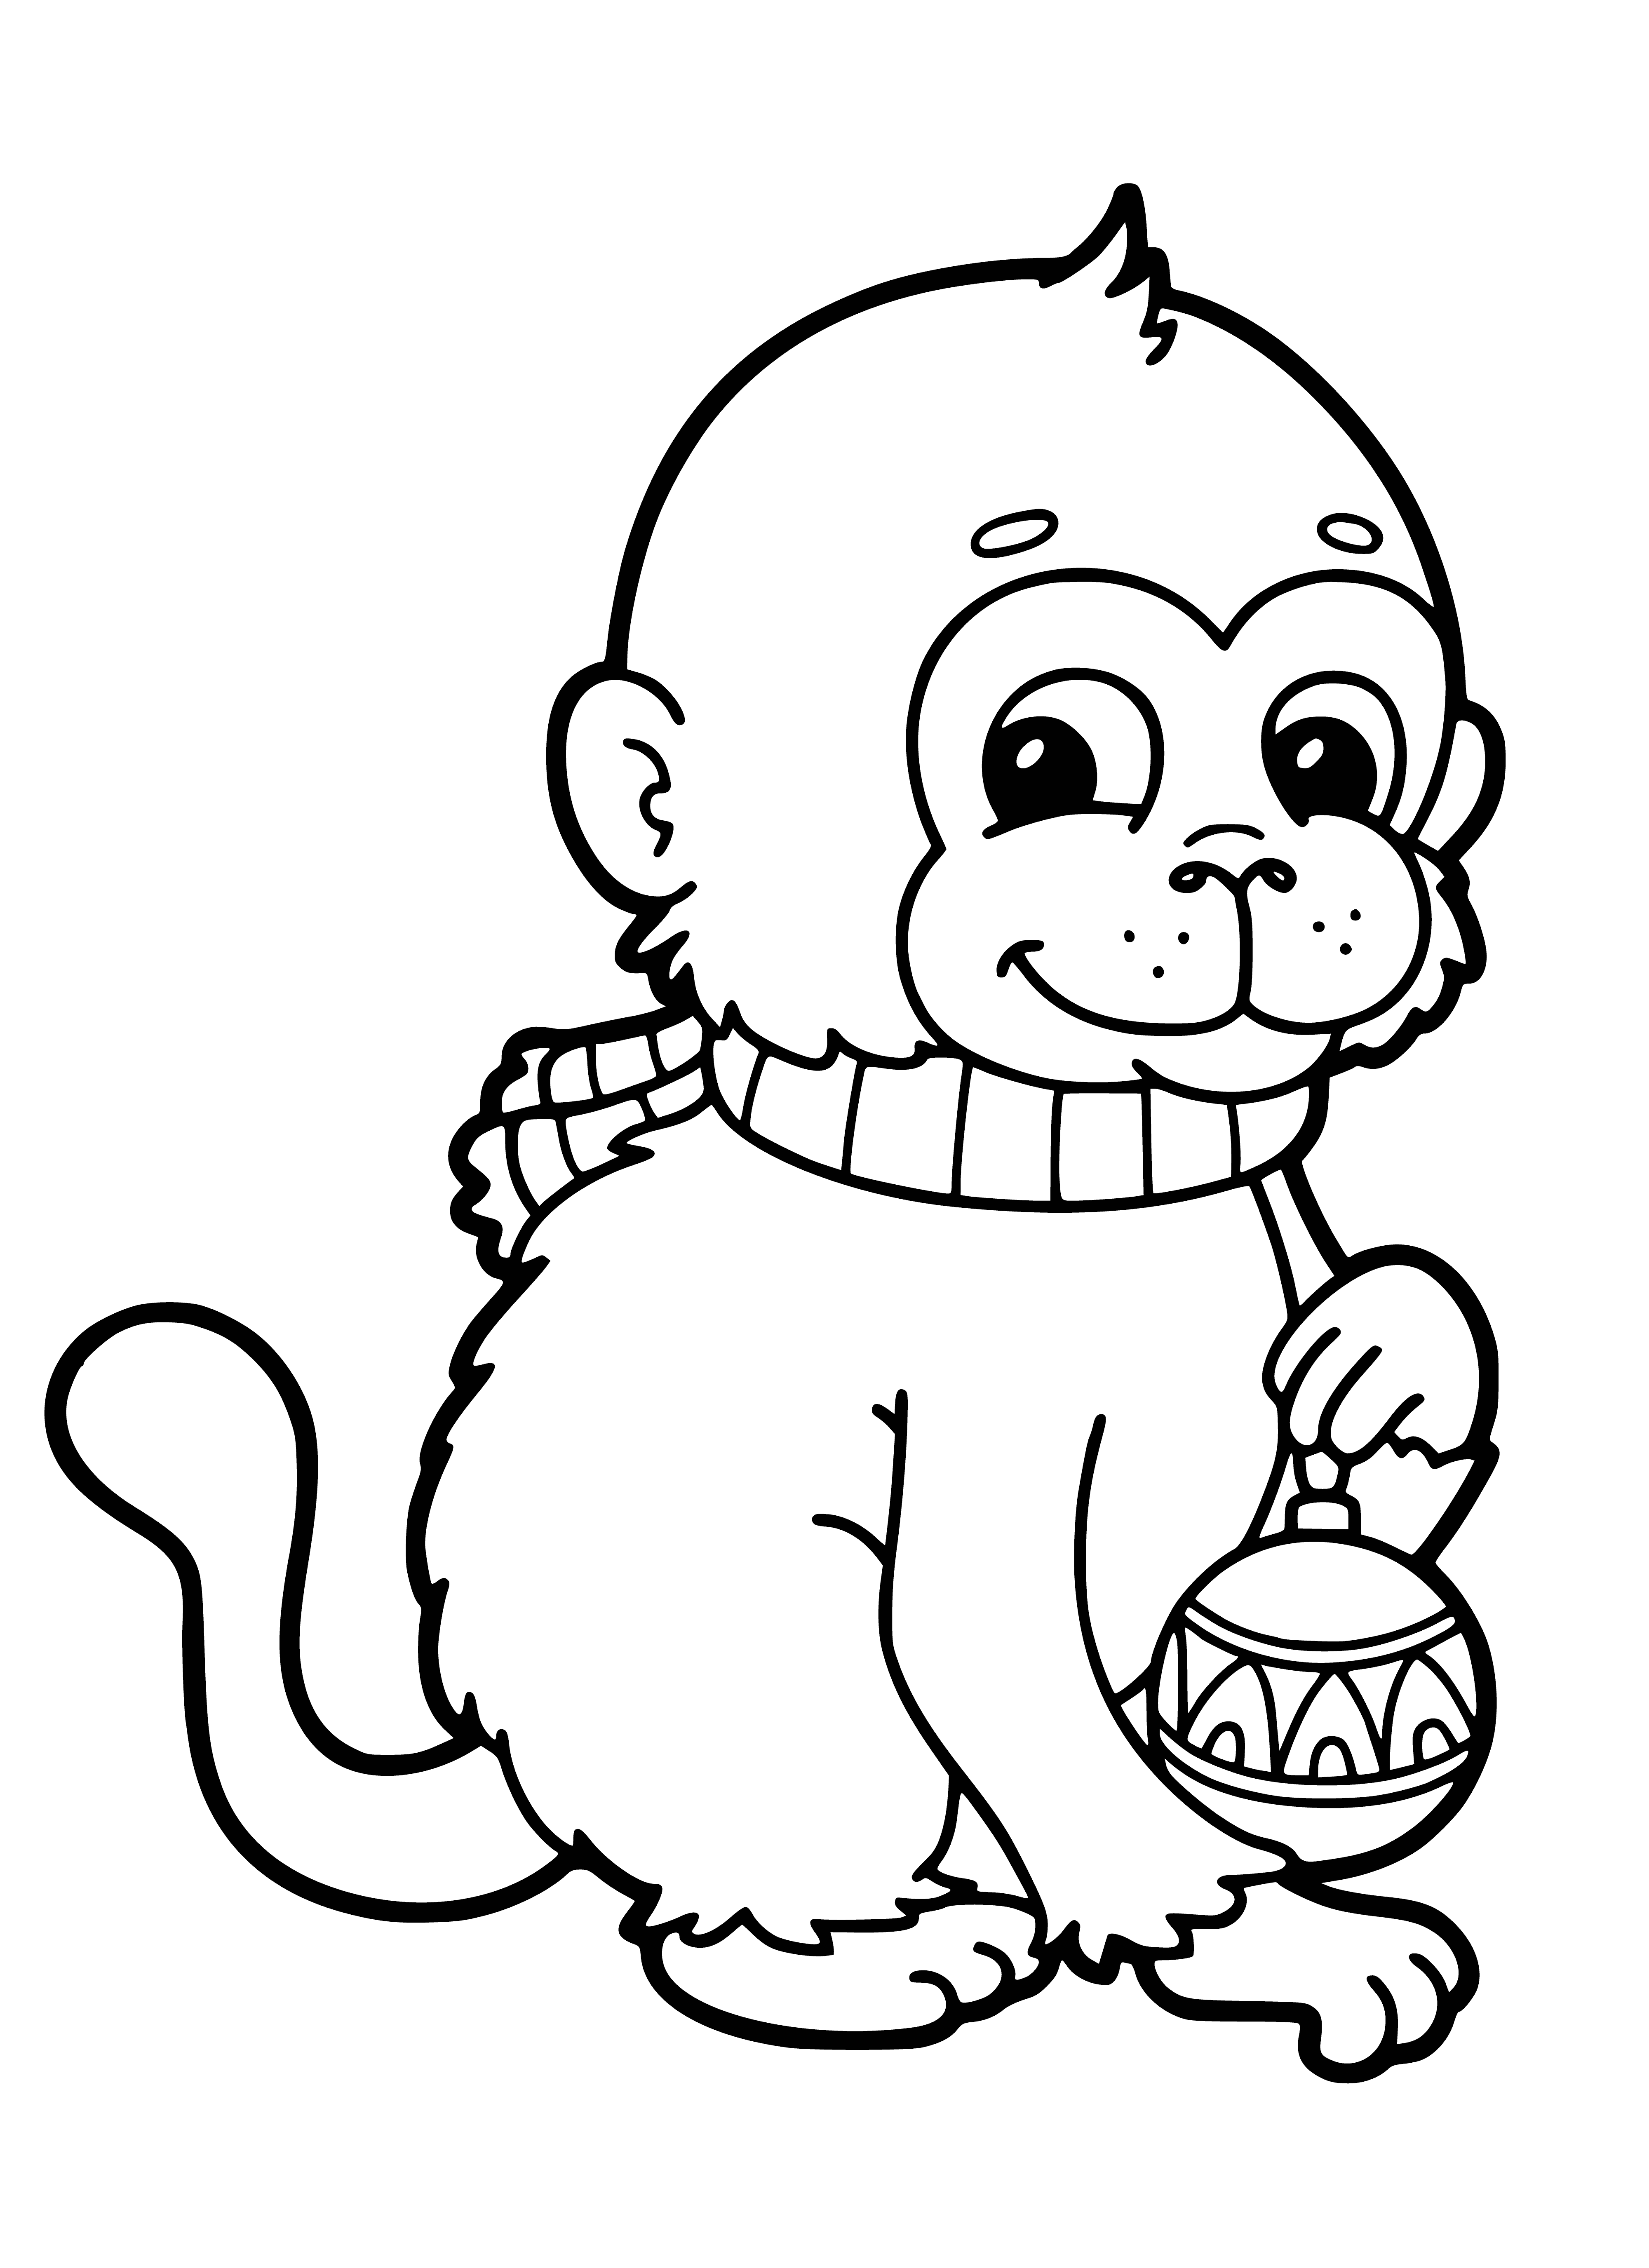 Monkey with christmas ball coloring page